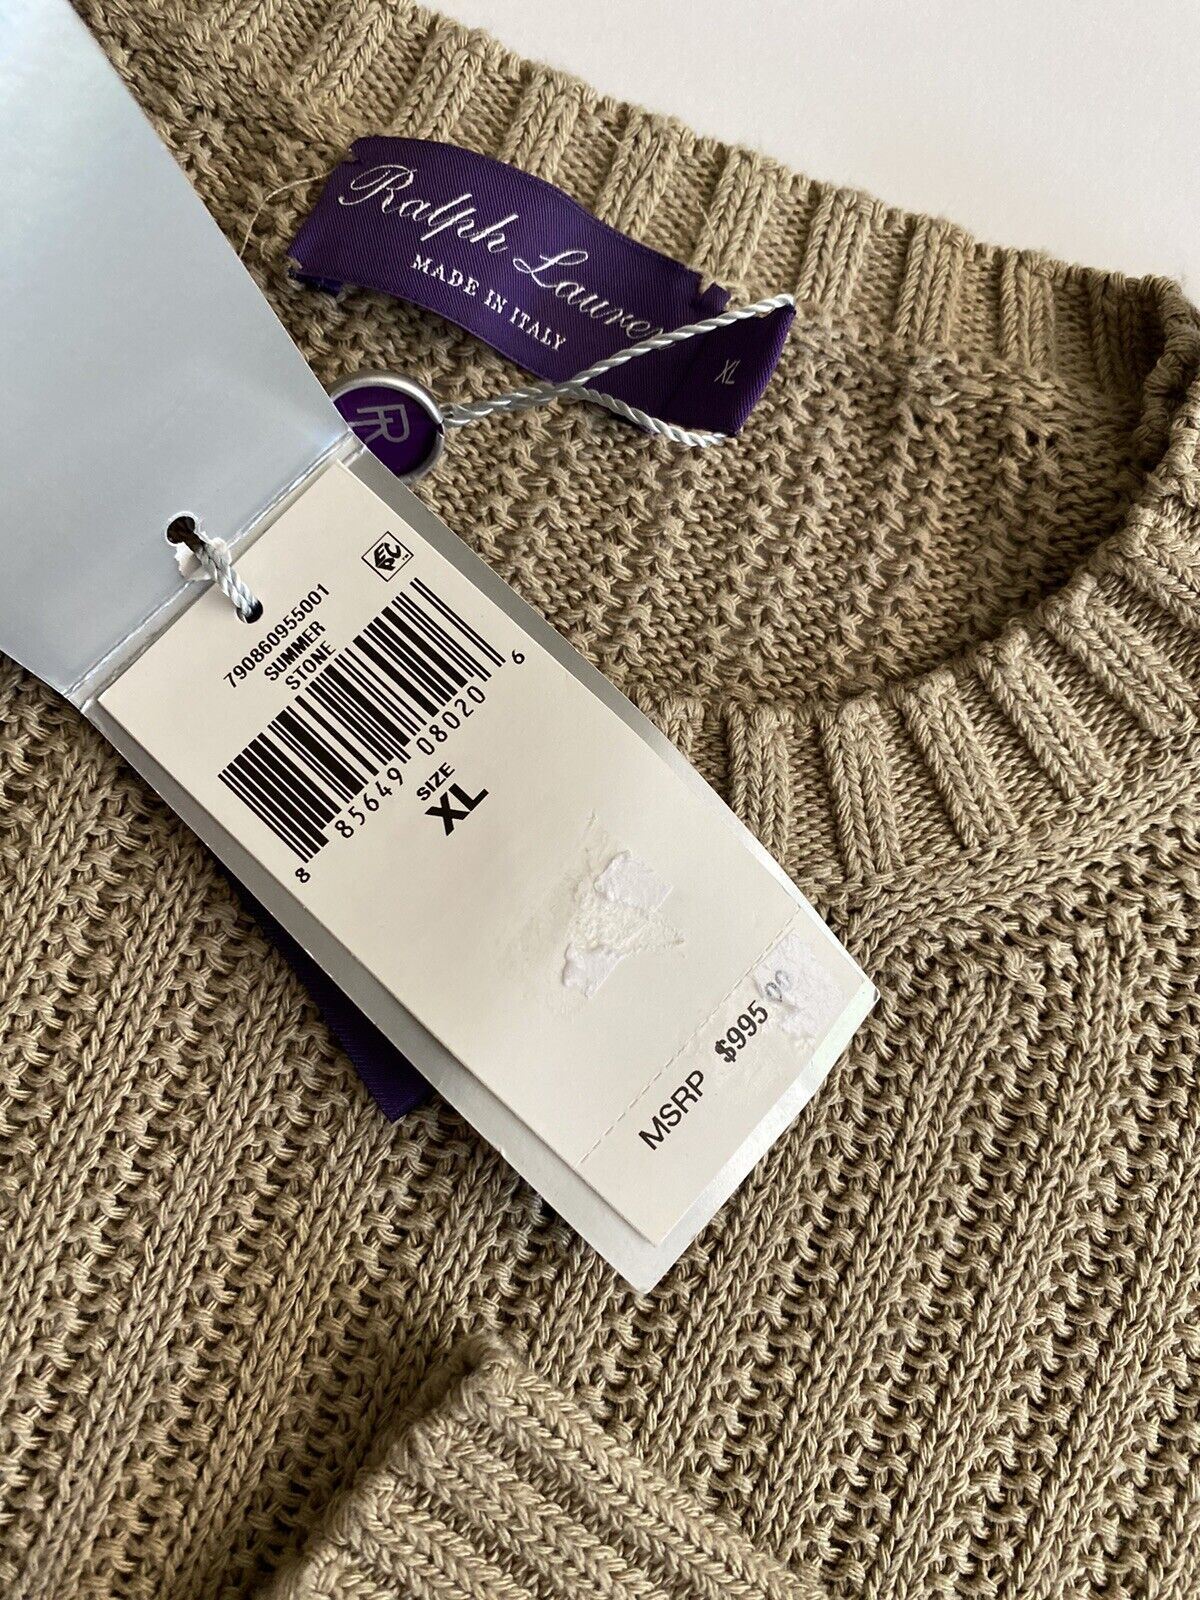 NWT $995 Polo Ralph Lauren Purple Label Men's Silk Sweater XL Made in Italy